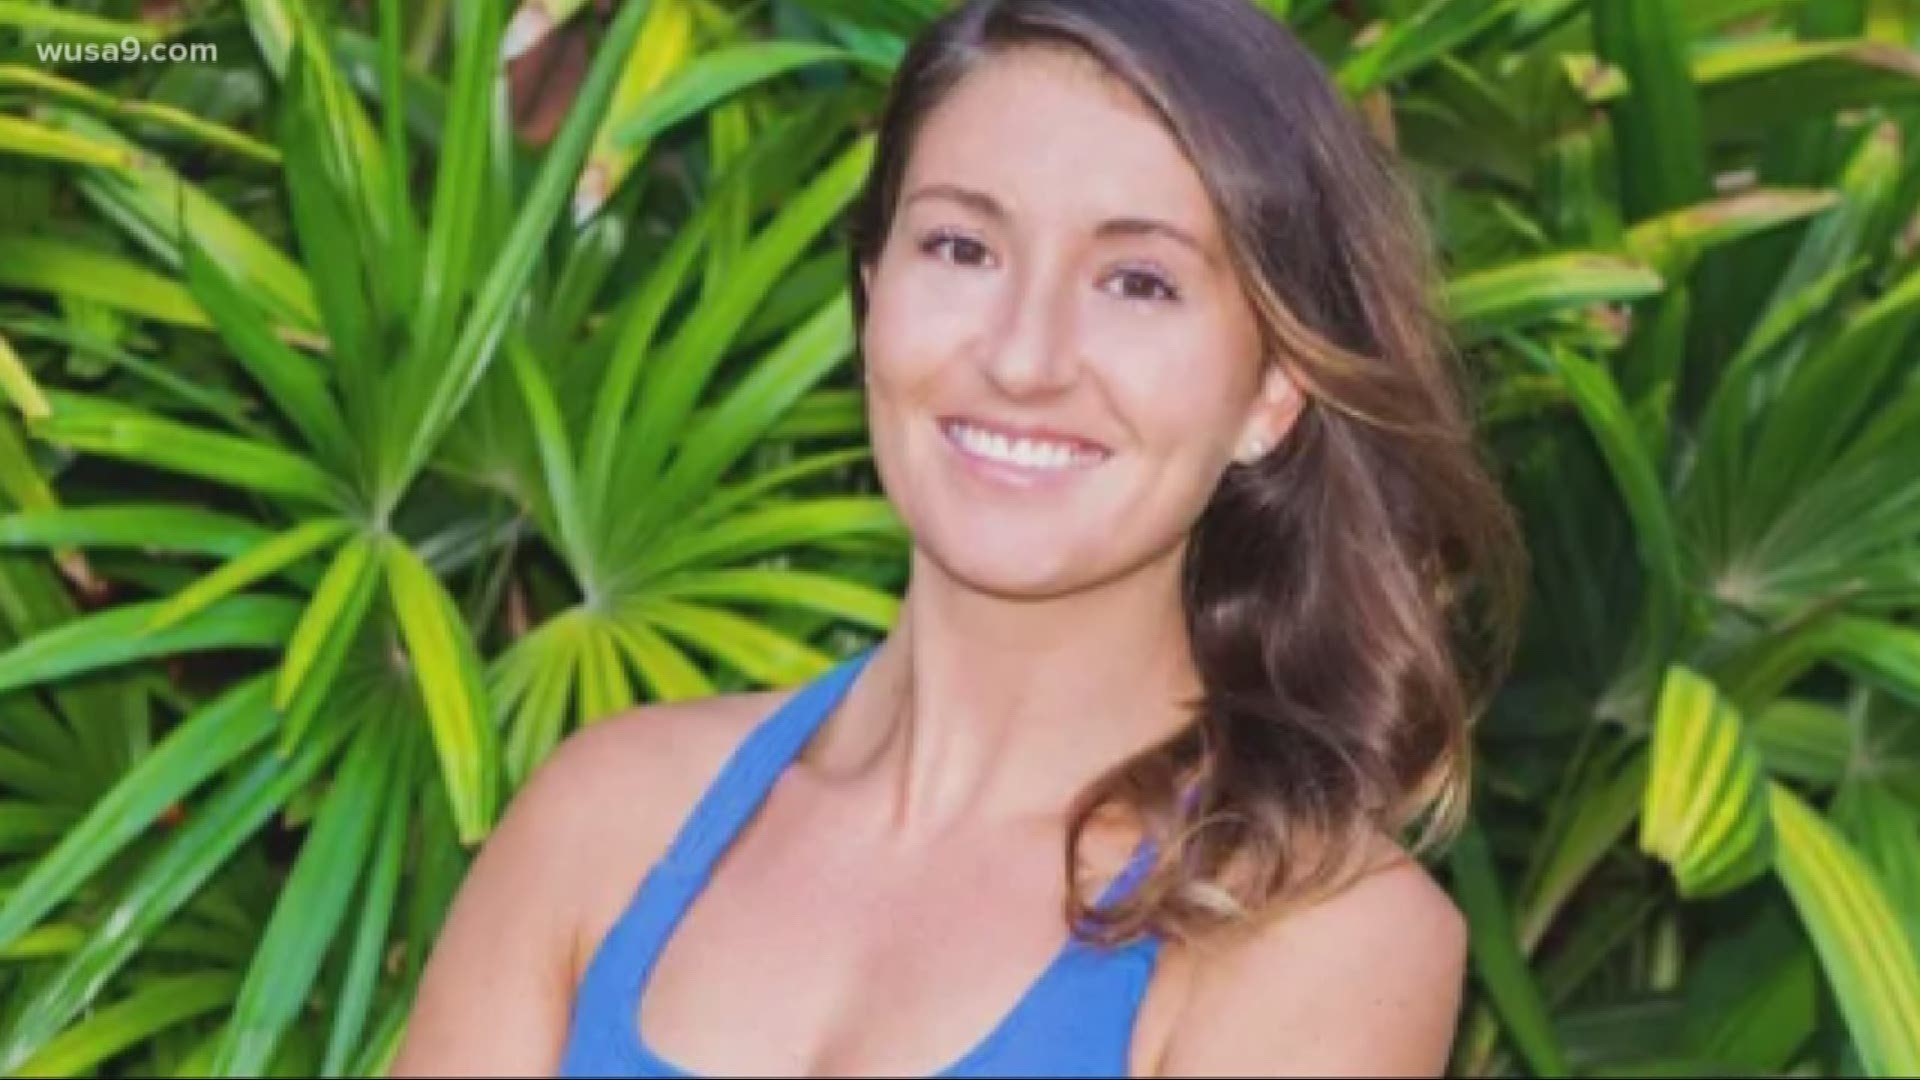 Volunteers are scouring a forest reserve in Maui for a missing Maryland woman, Amanda Eller, who vanished last week.